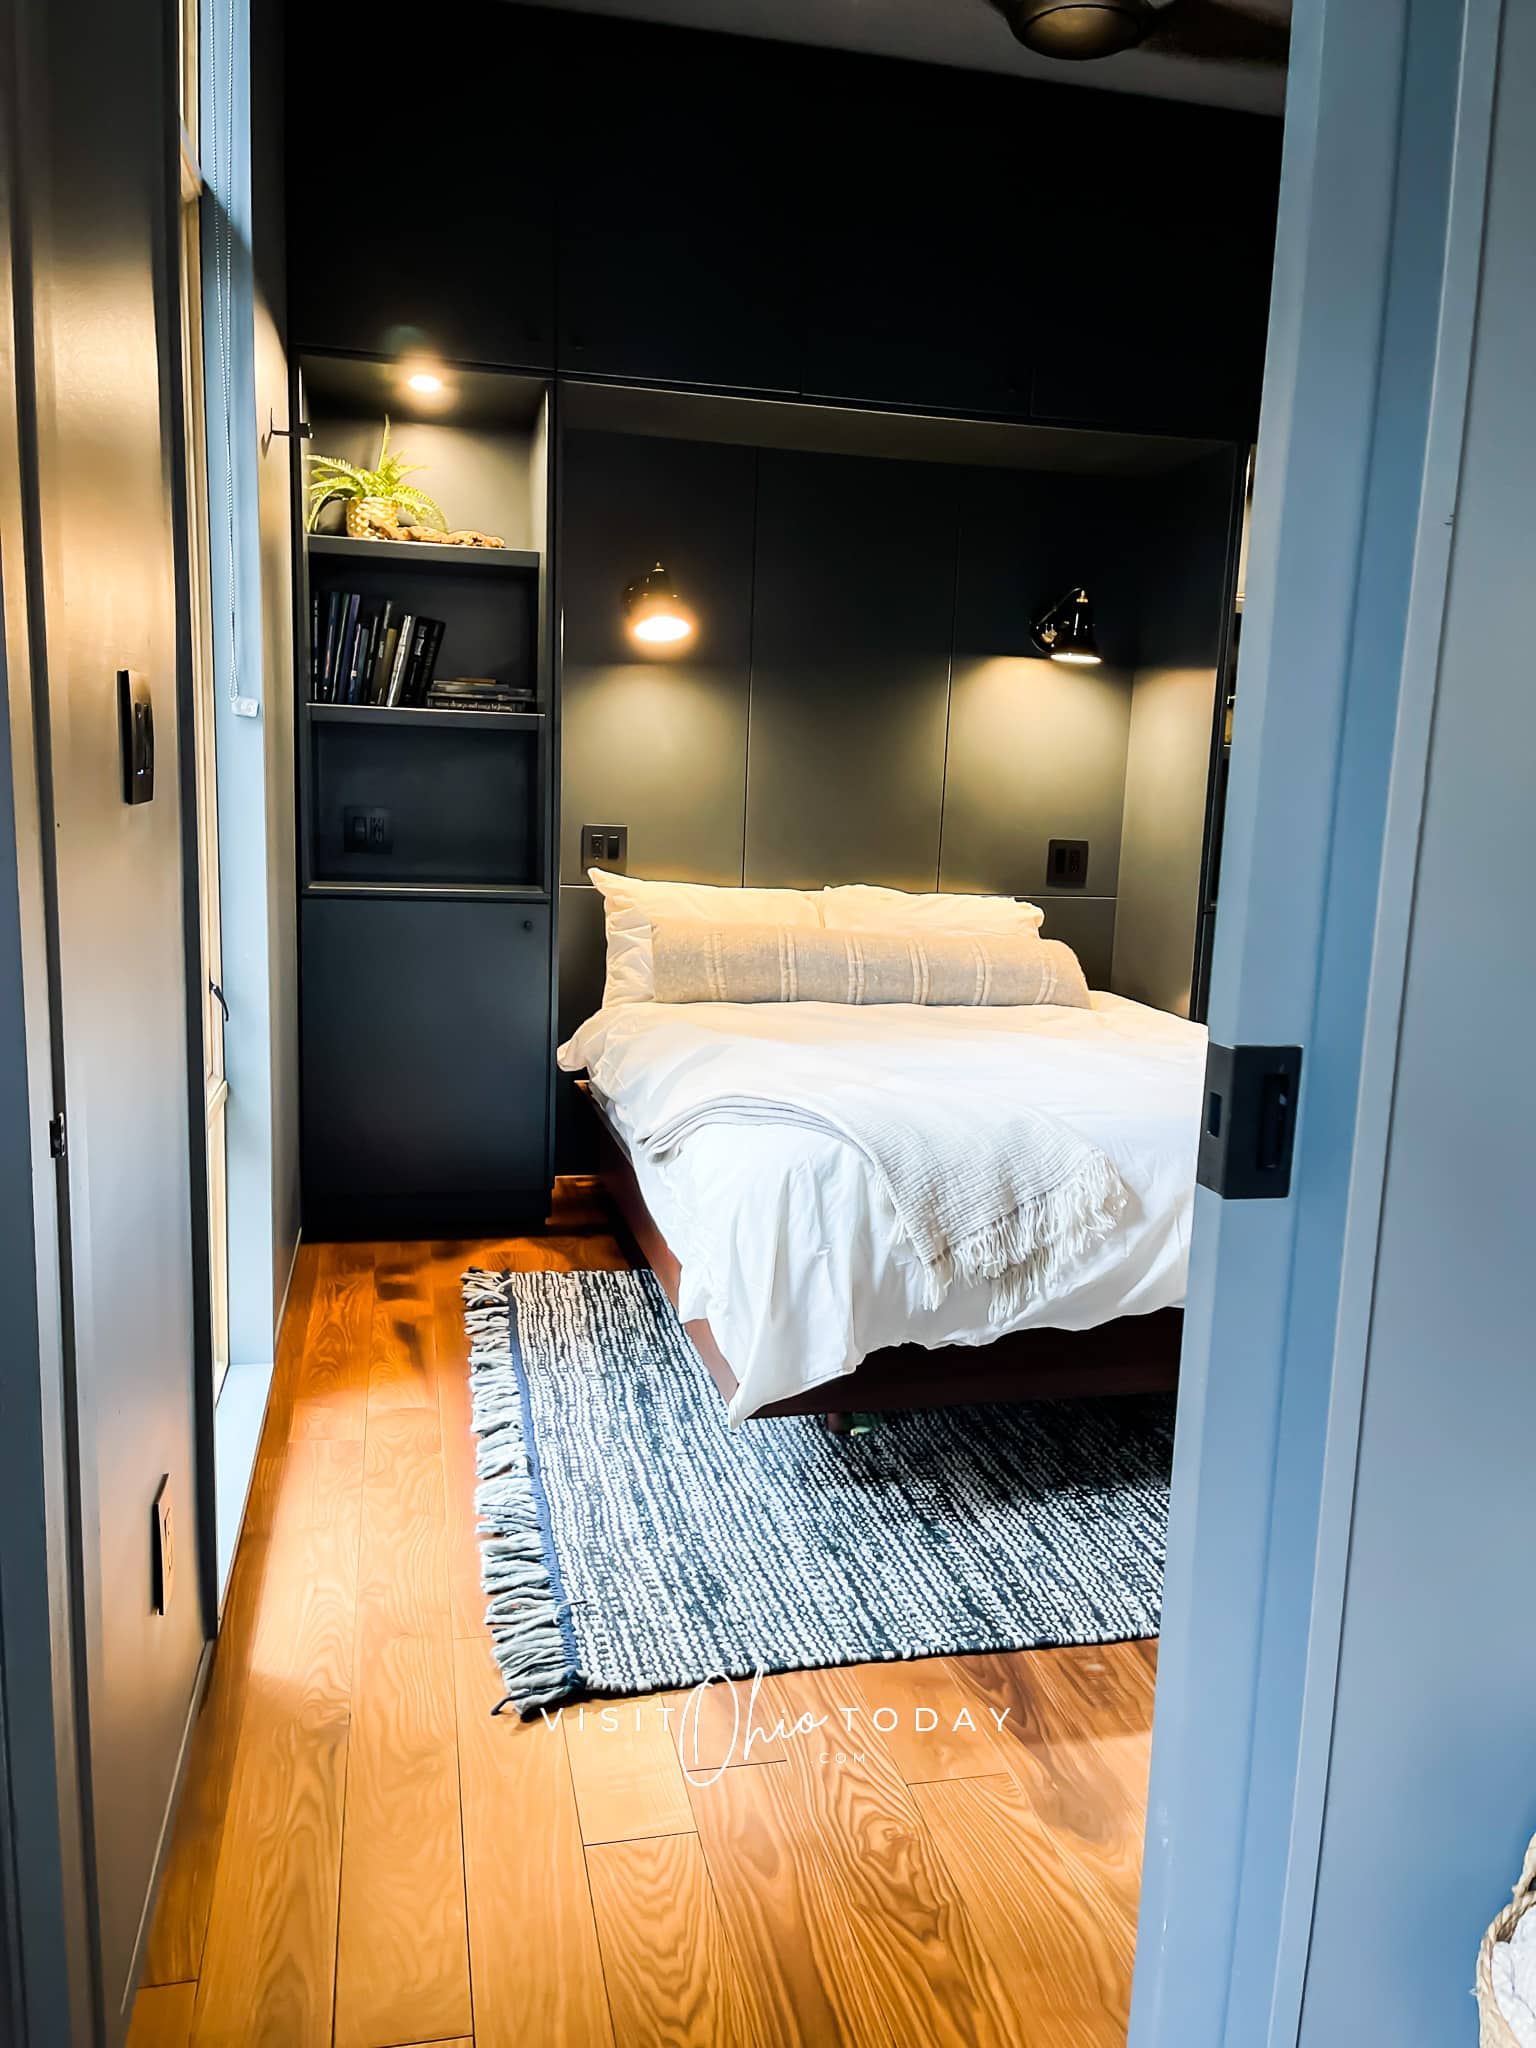 Pictured is a bed with white covers a black and white rug under it and wall lights